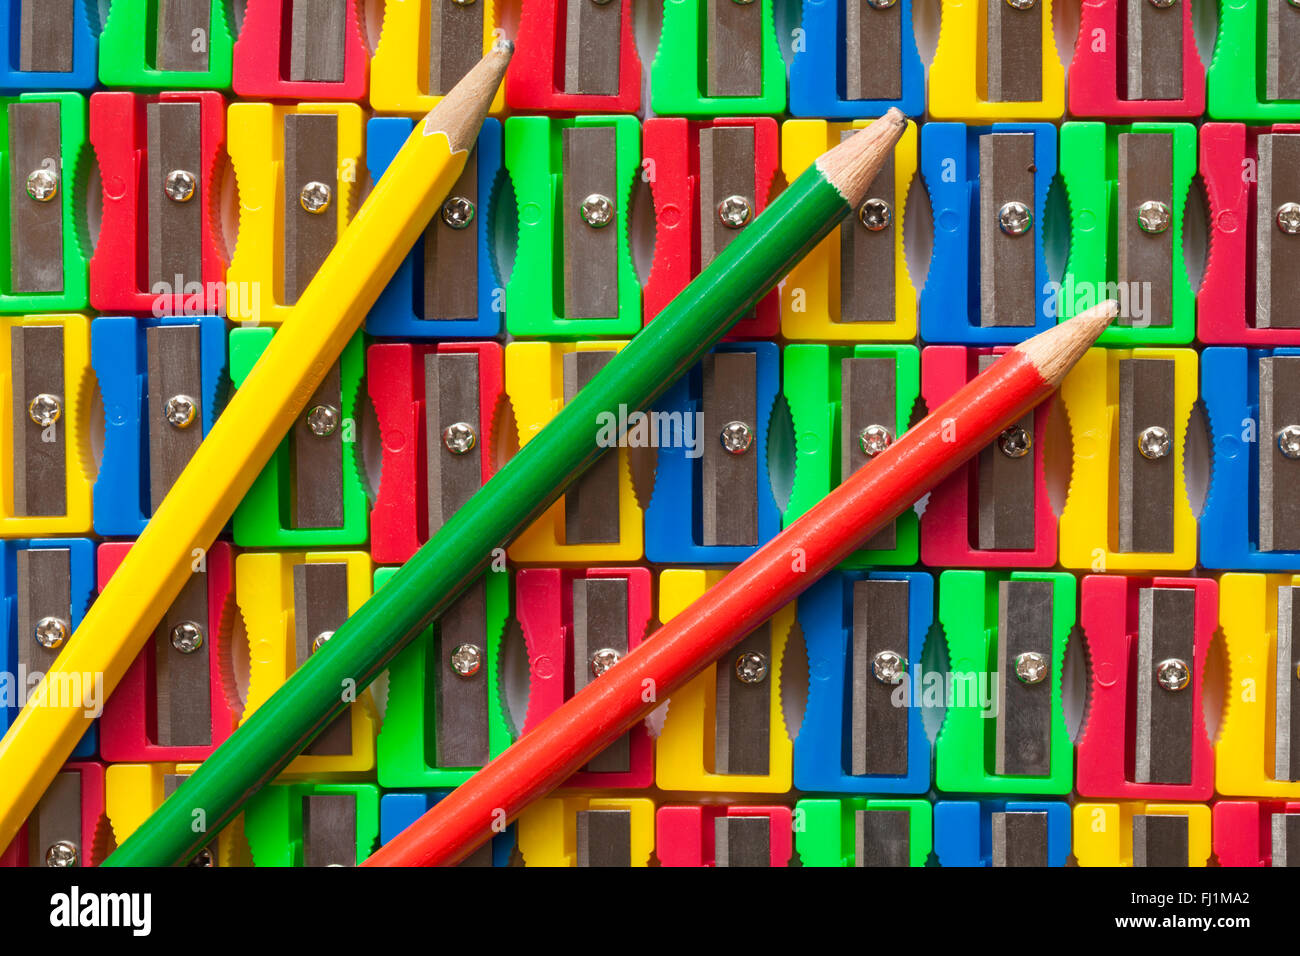 Rows of colourful red, yellow, green and blue plastic pencil sharpeners with yellow green and red pencils that need sharpening Stock Photo